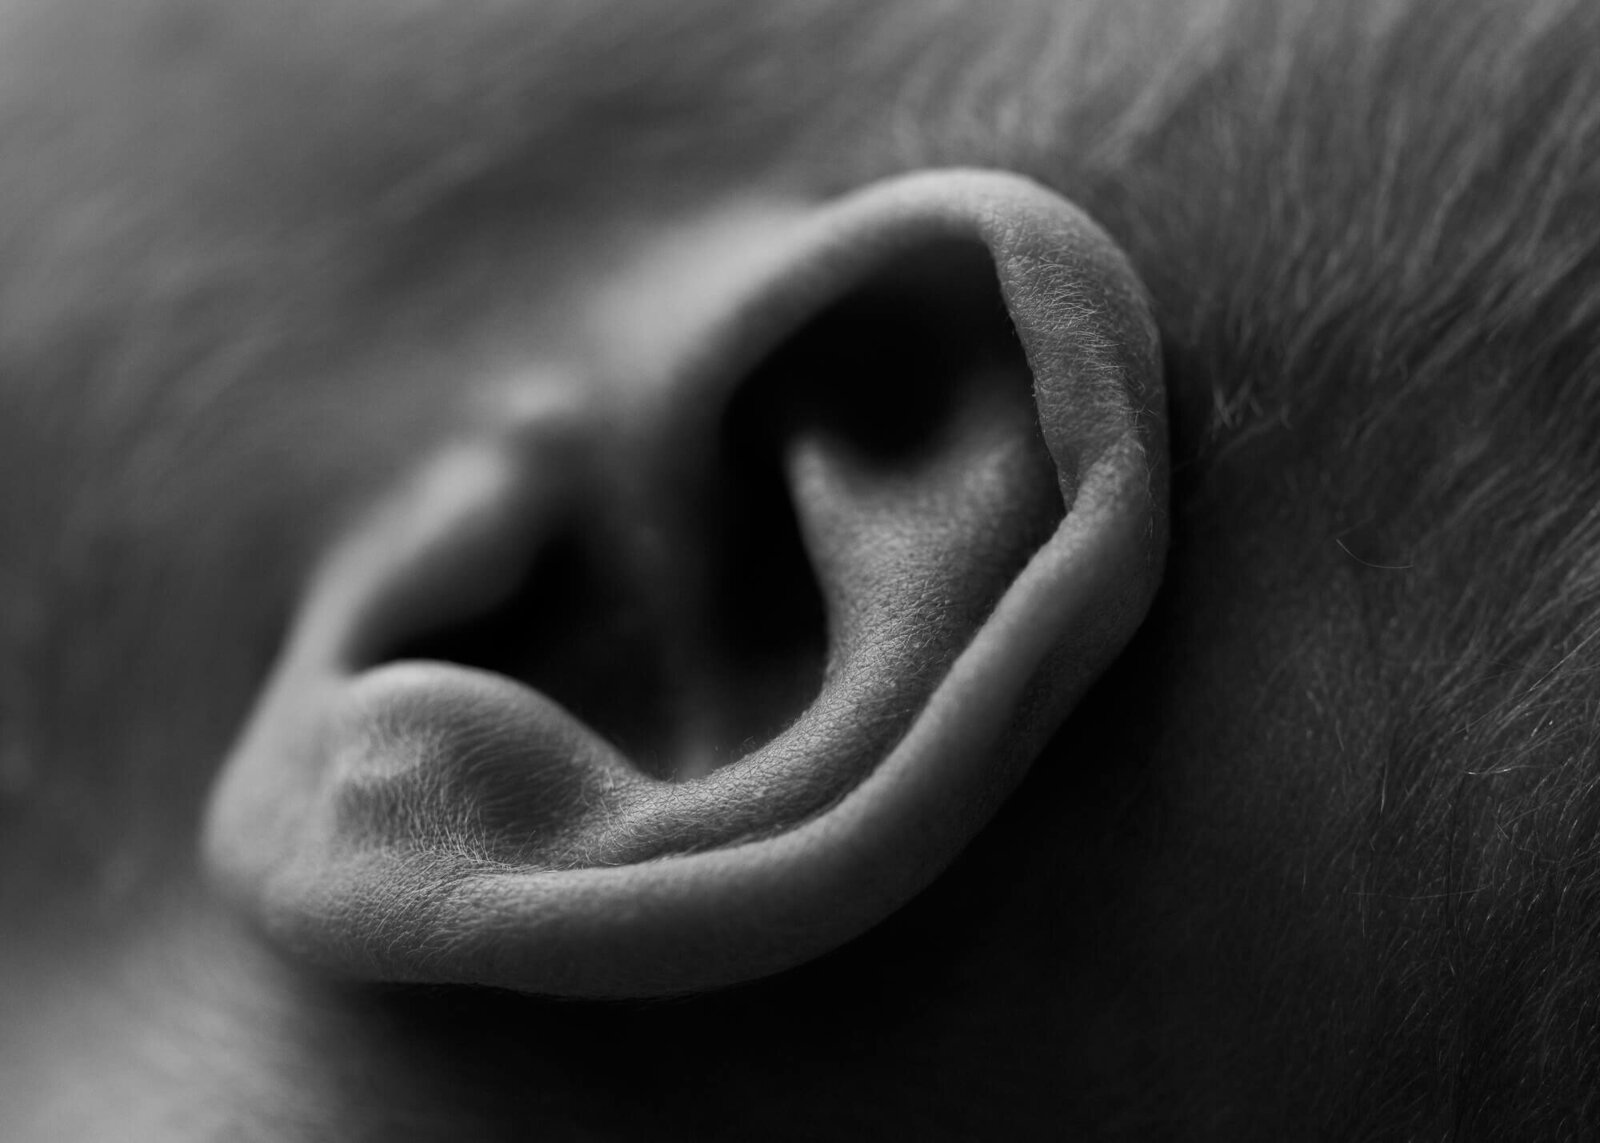 close-up black and white image of baby ear